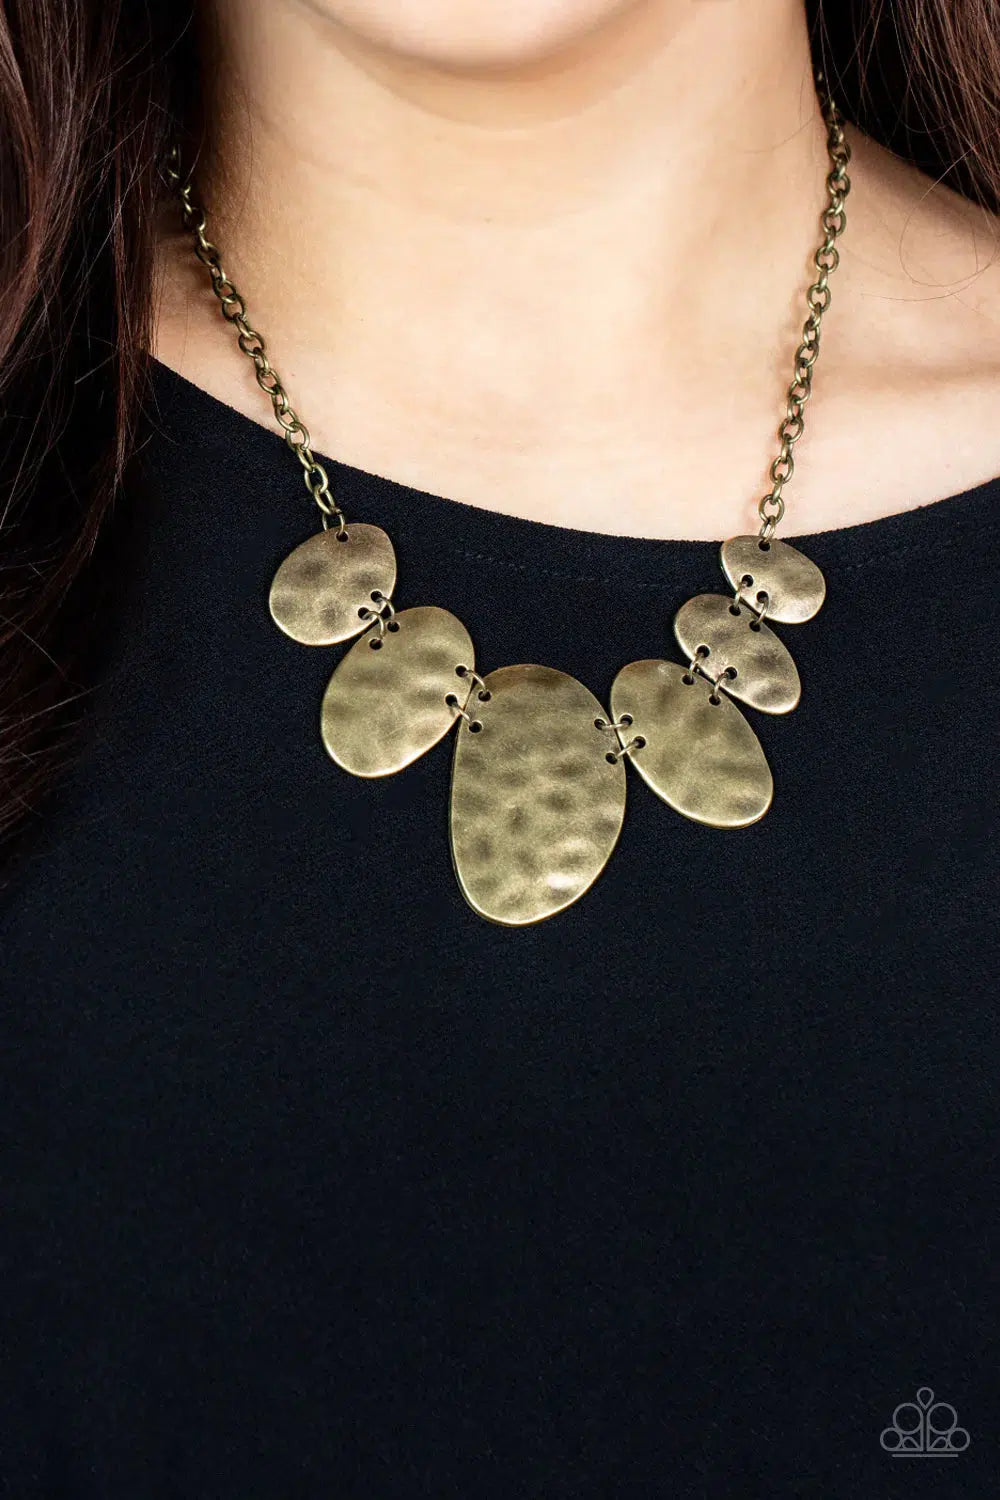 Cave Crawl Brass Necklace - Paparazzi Accessories-on model - CarasShop.com - $5 Jewelry by Cara Jewels